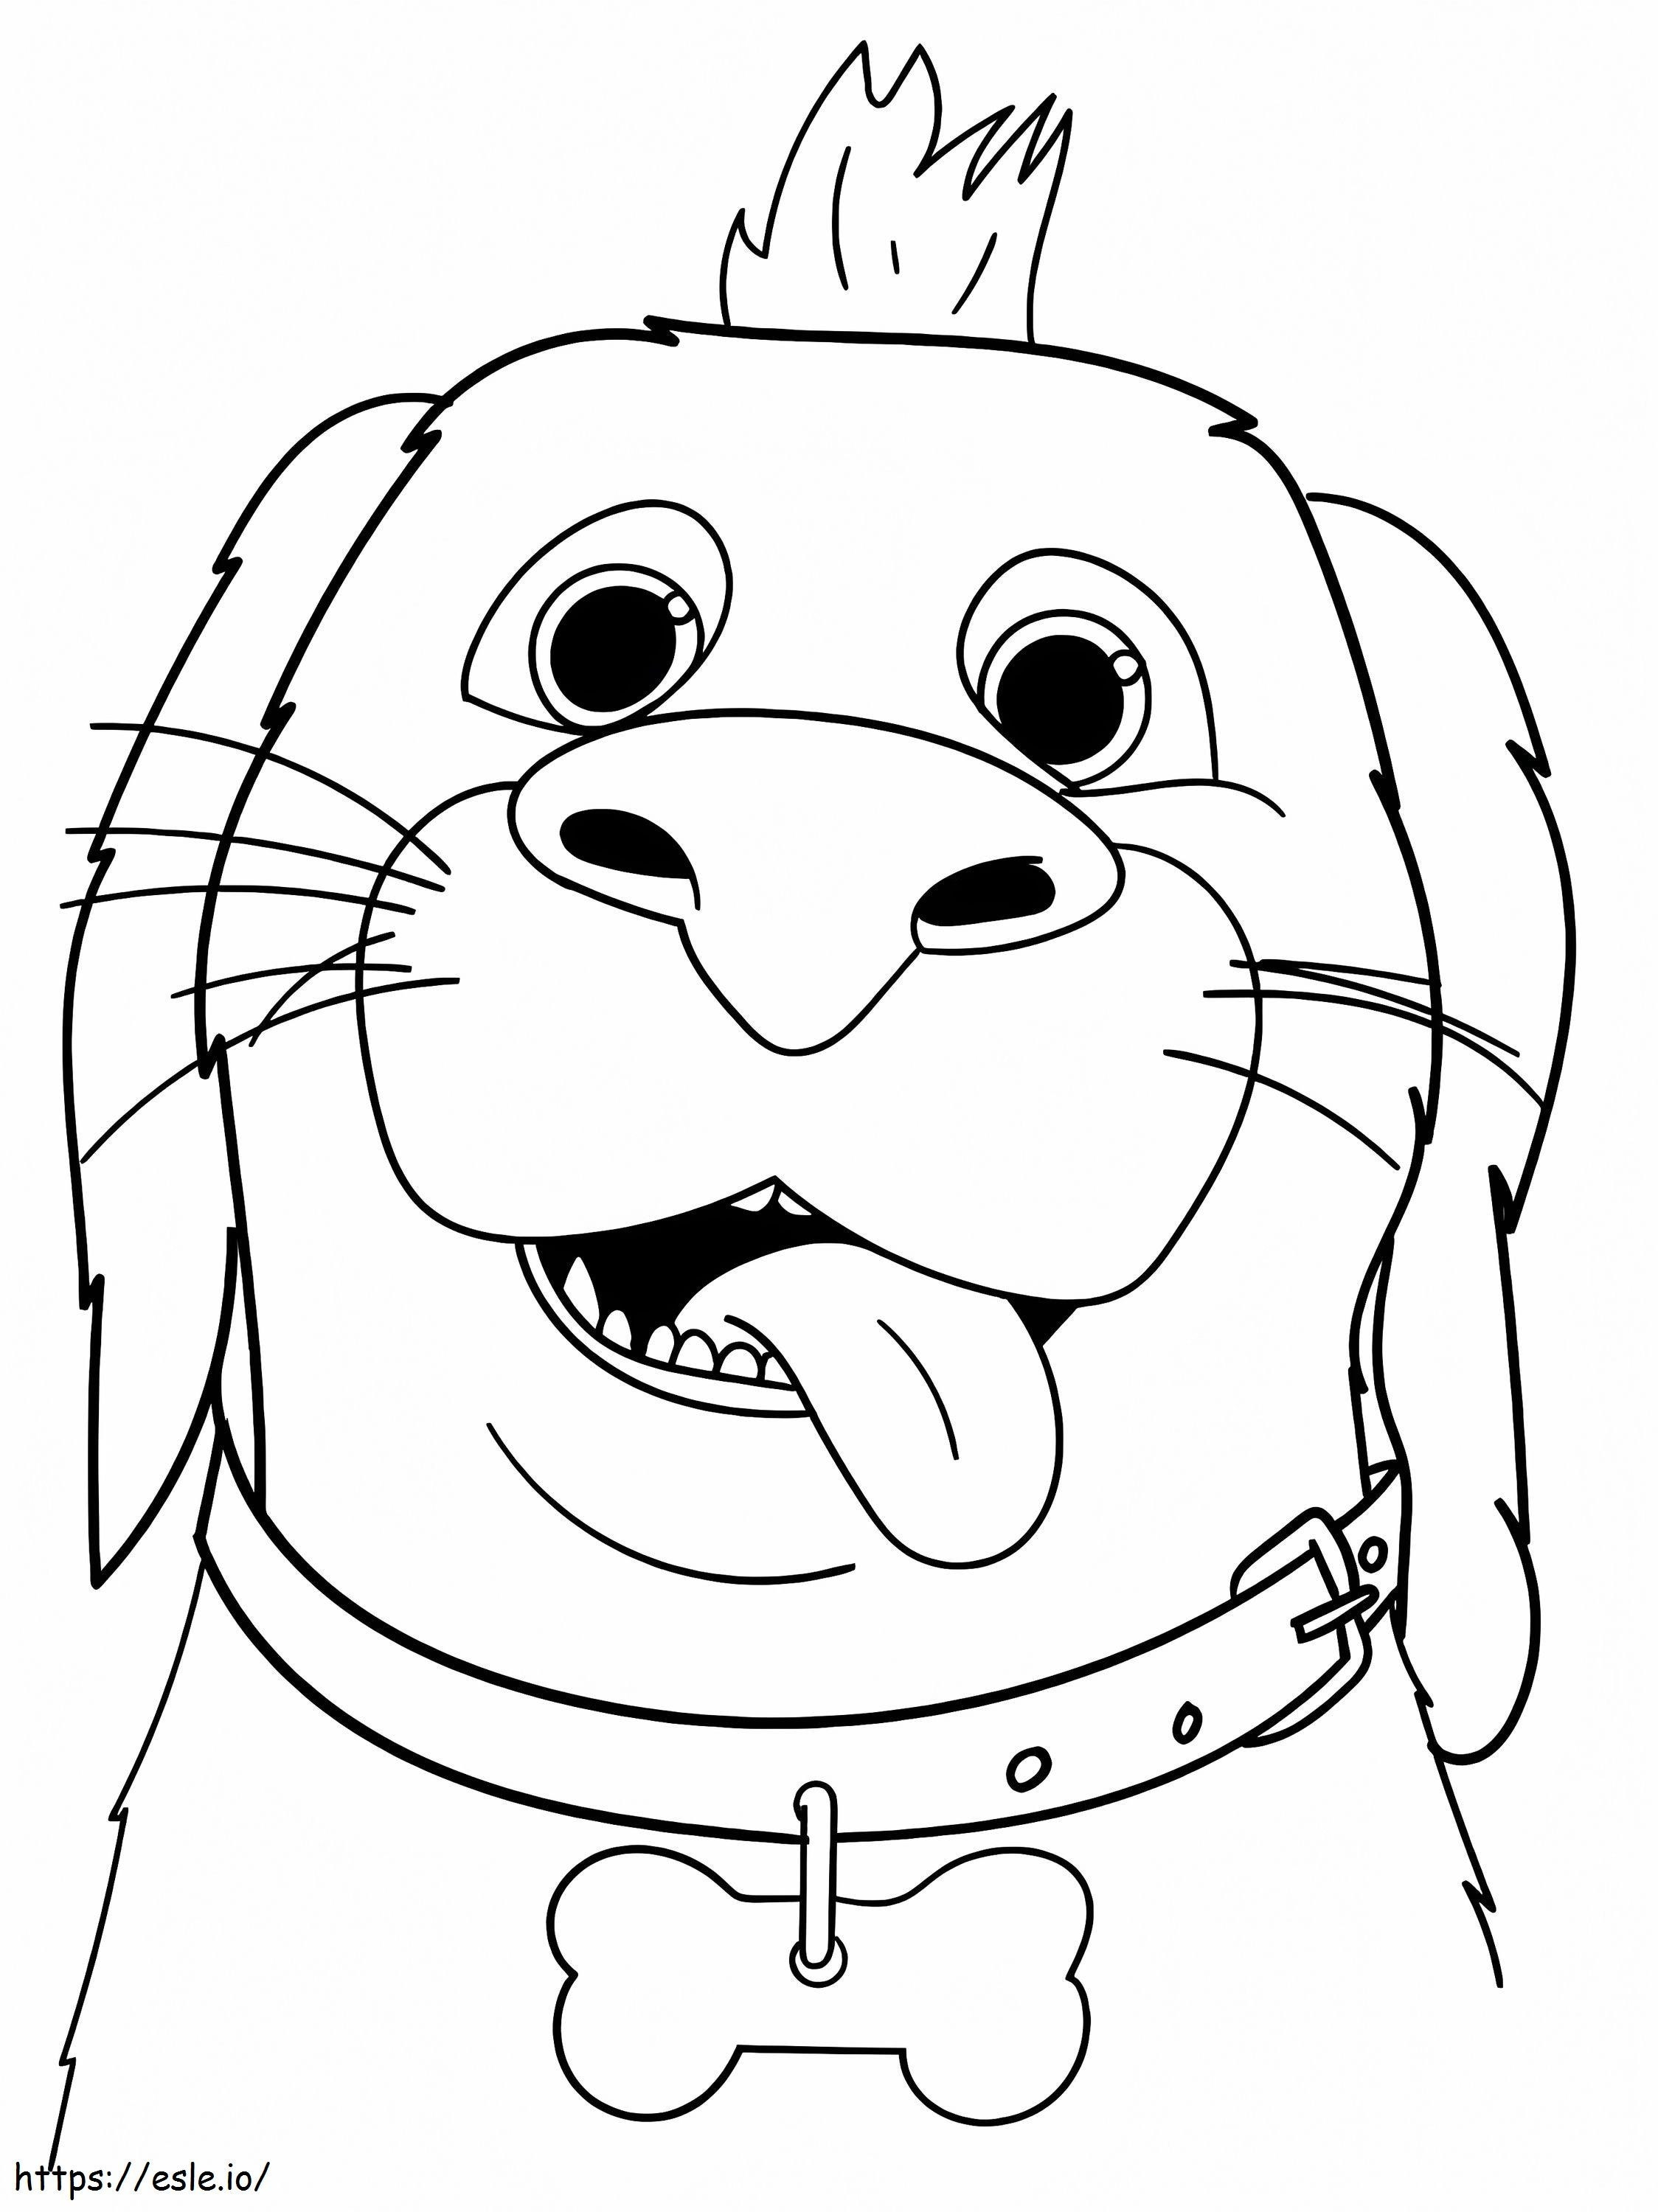 Major From Karmas World coloring page